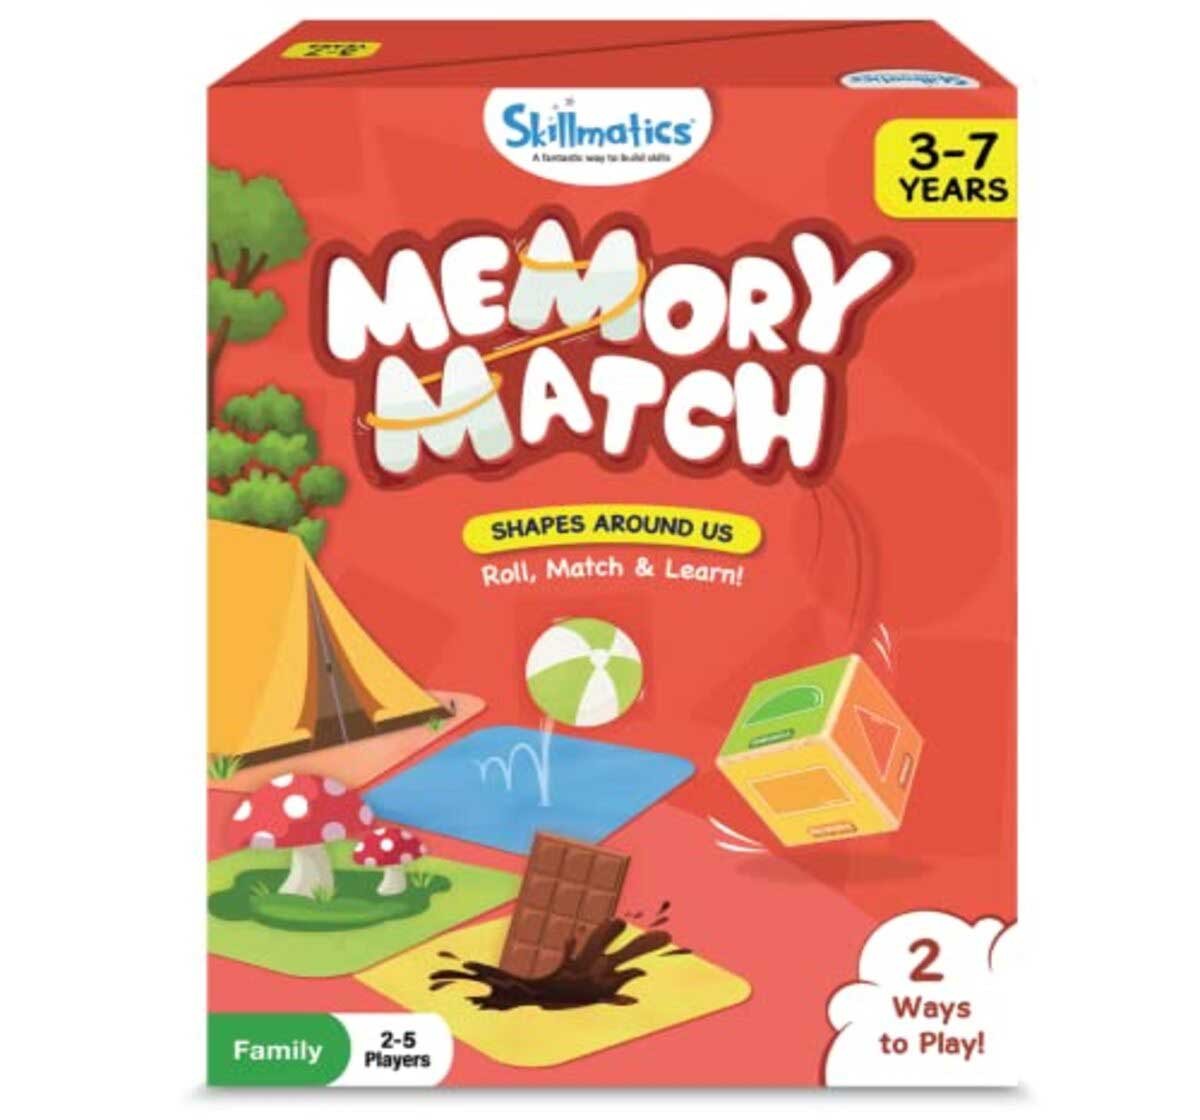 Skillmatics Memory for Shapes Around Us Board Game for Kids 3Y+, Multicolour